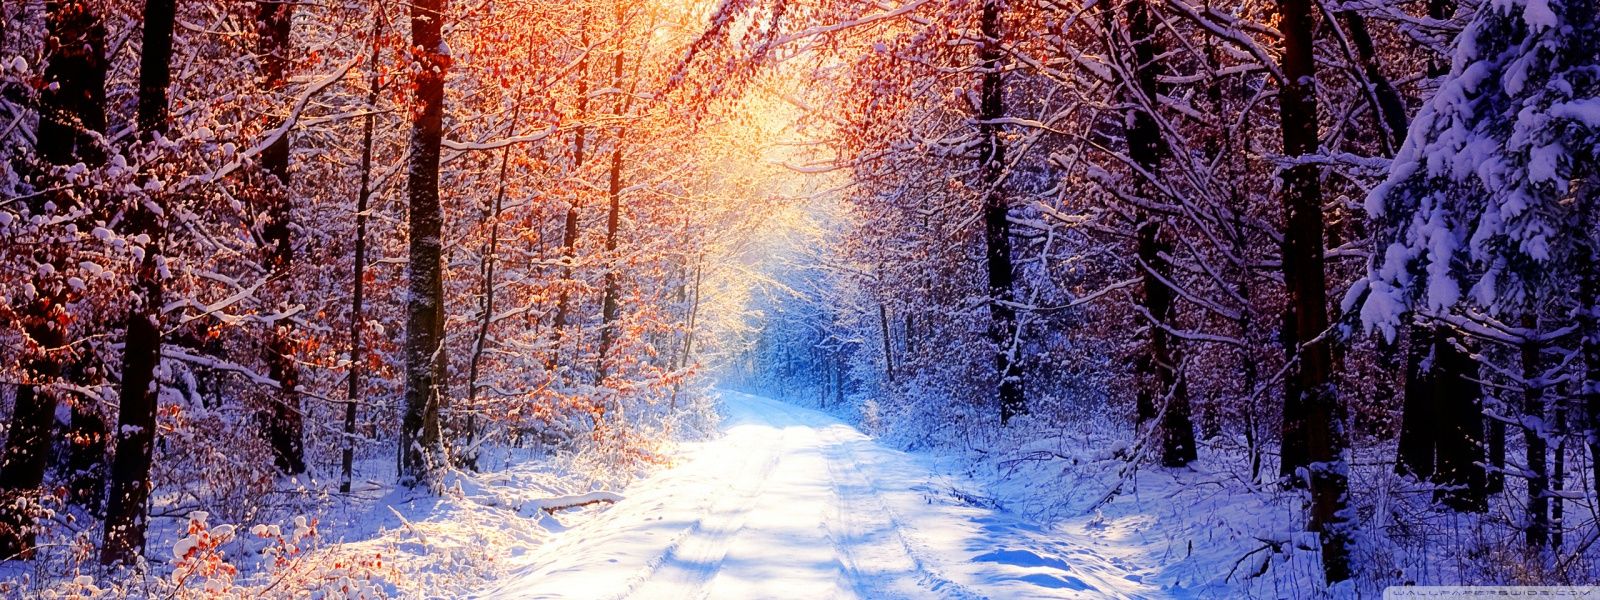 Winter Widescreen Wallpaper Wide Is Cool Wallpapers Winter cover